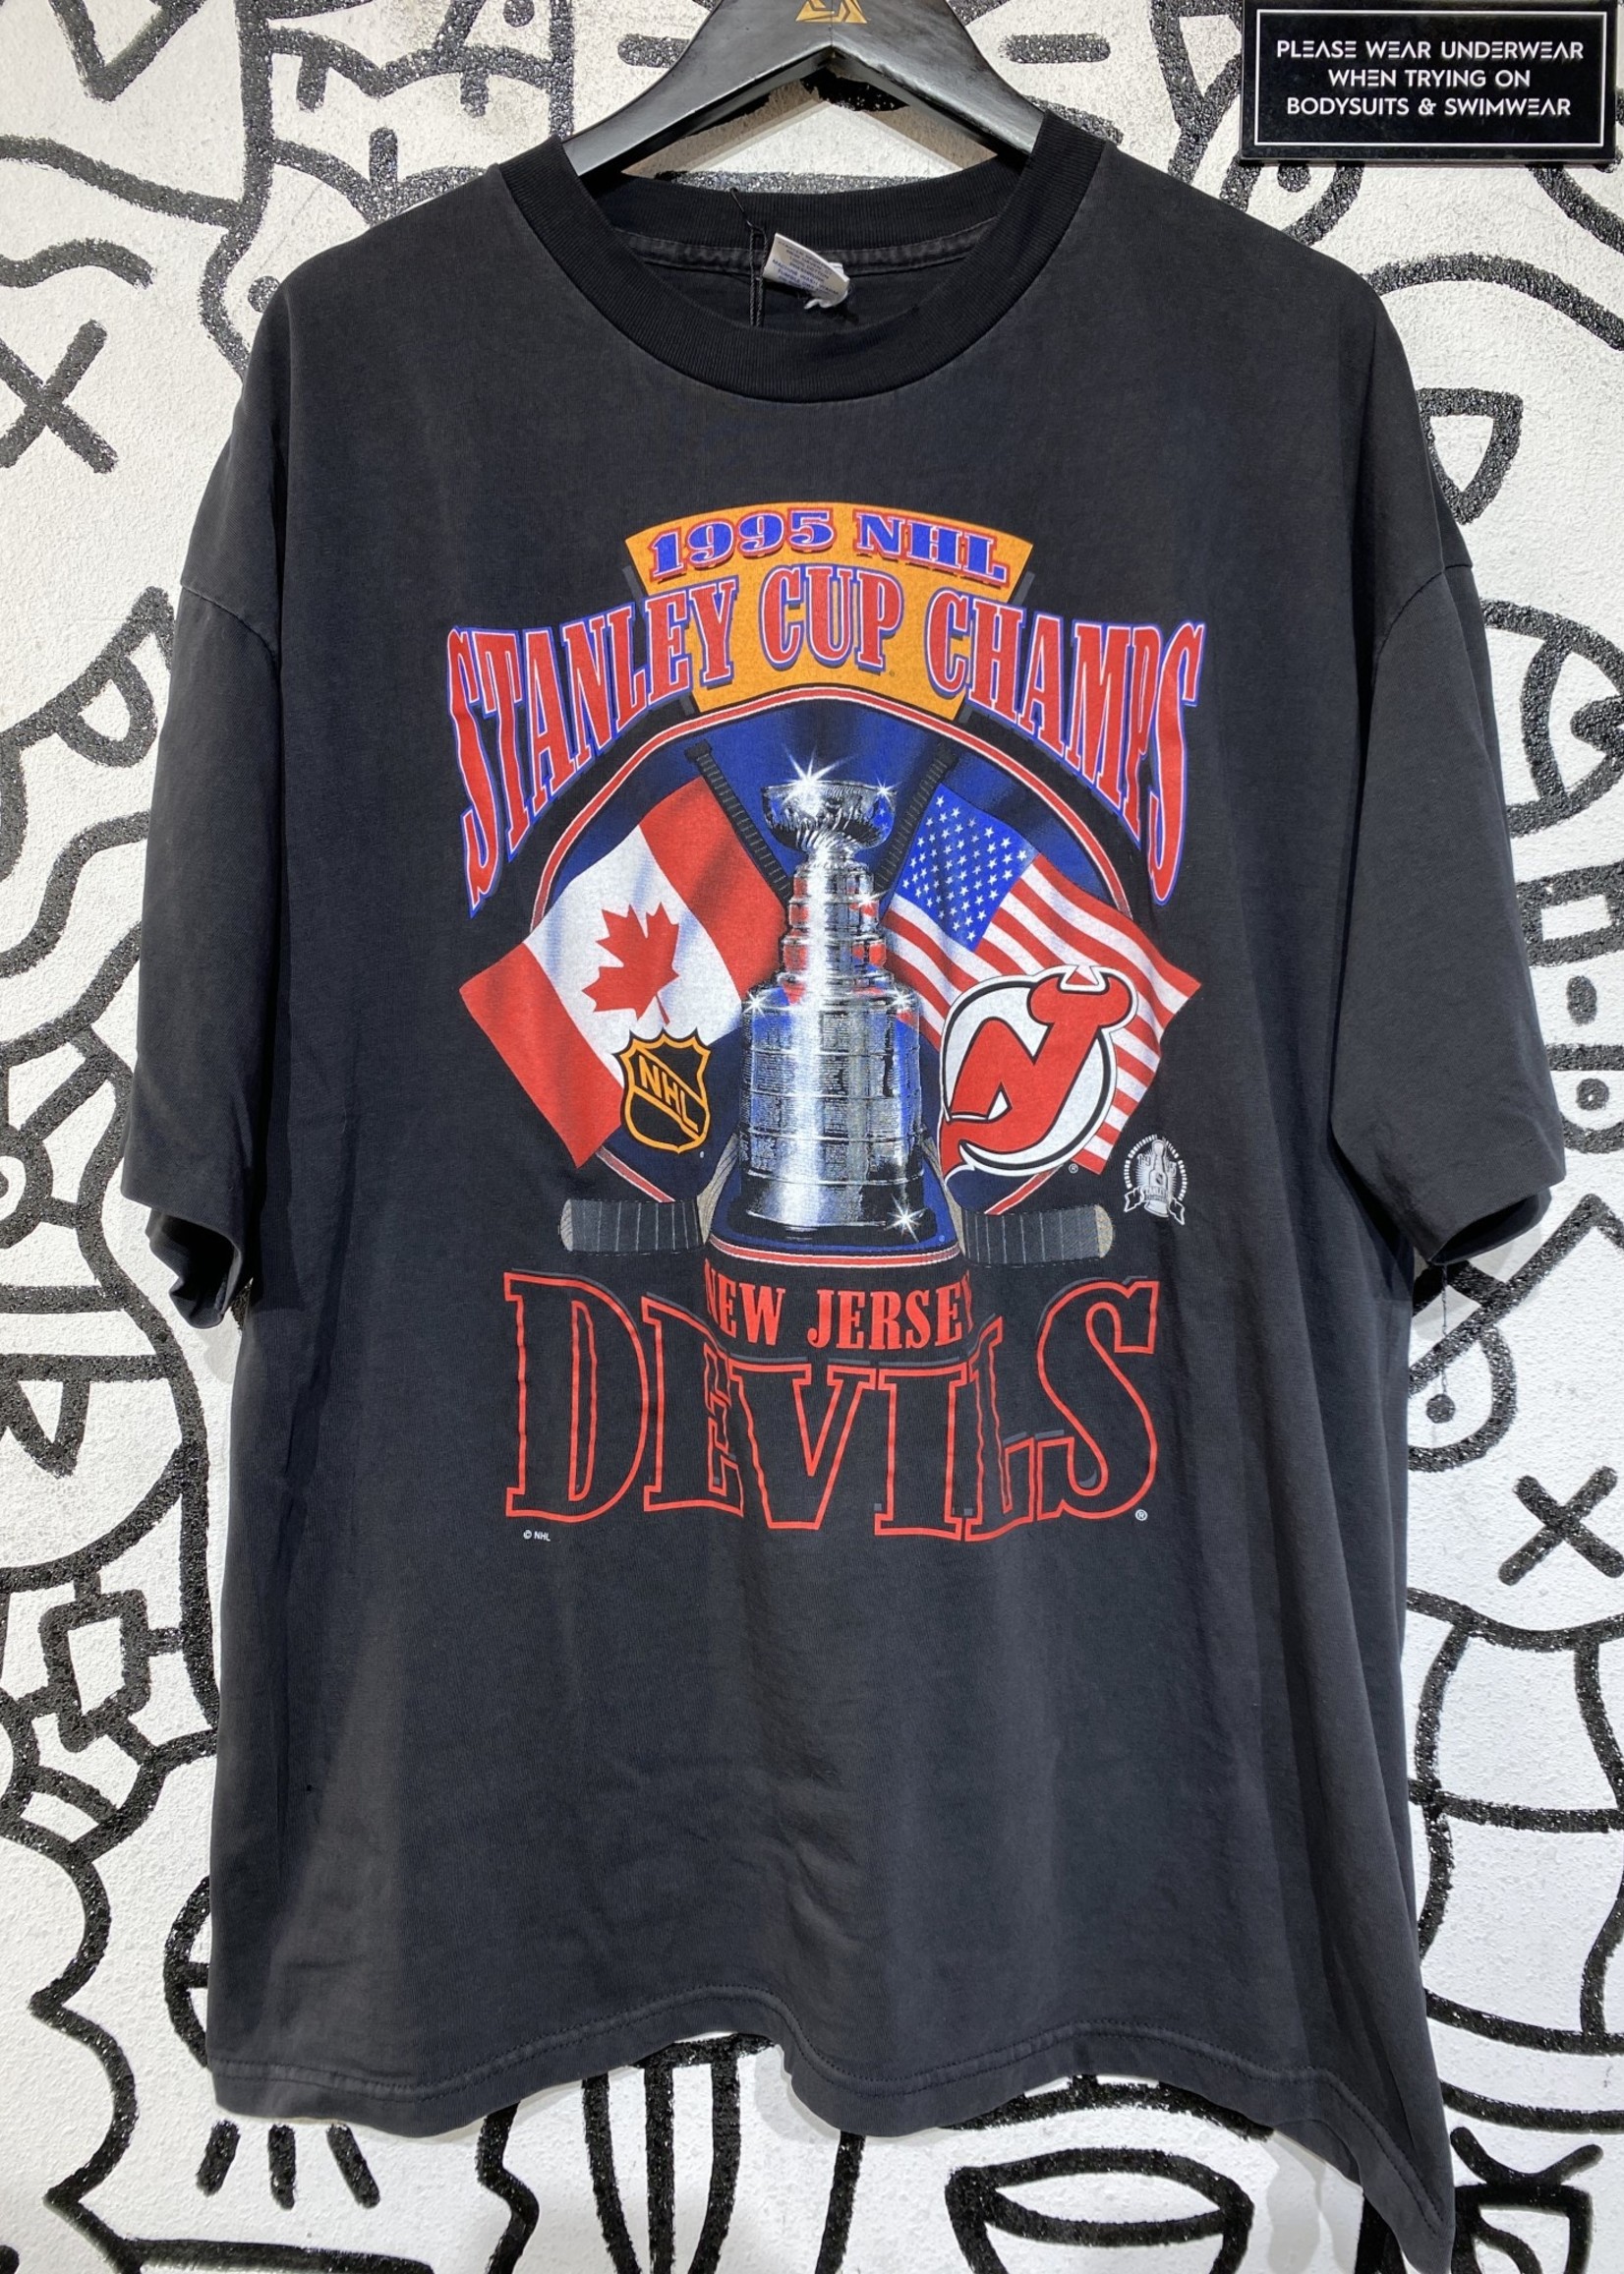 Stanley Cup Champs '95 Black Tee XL